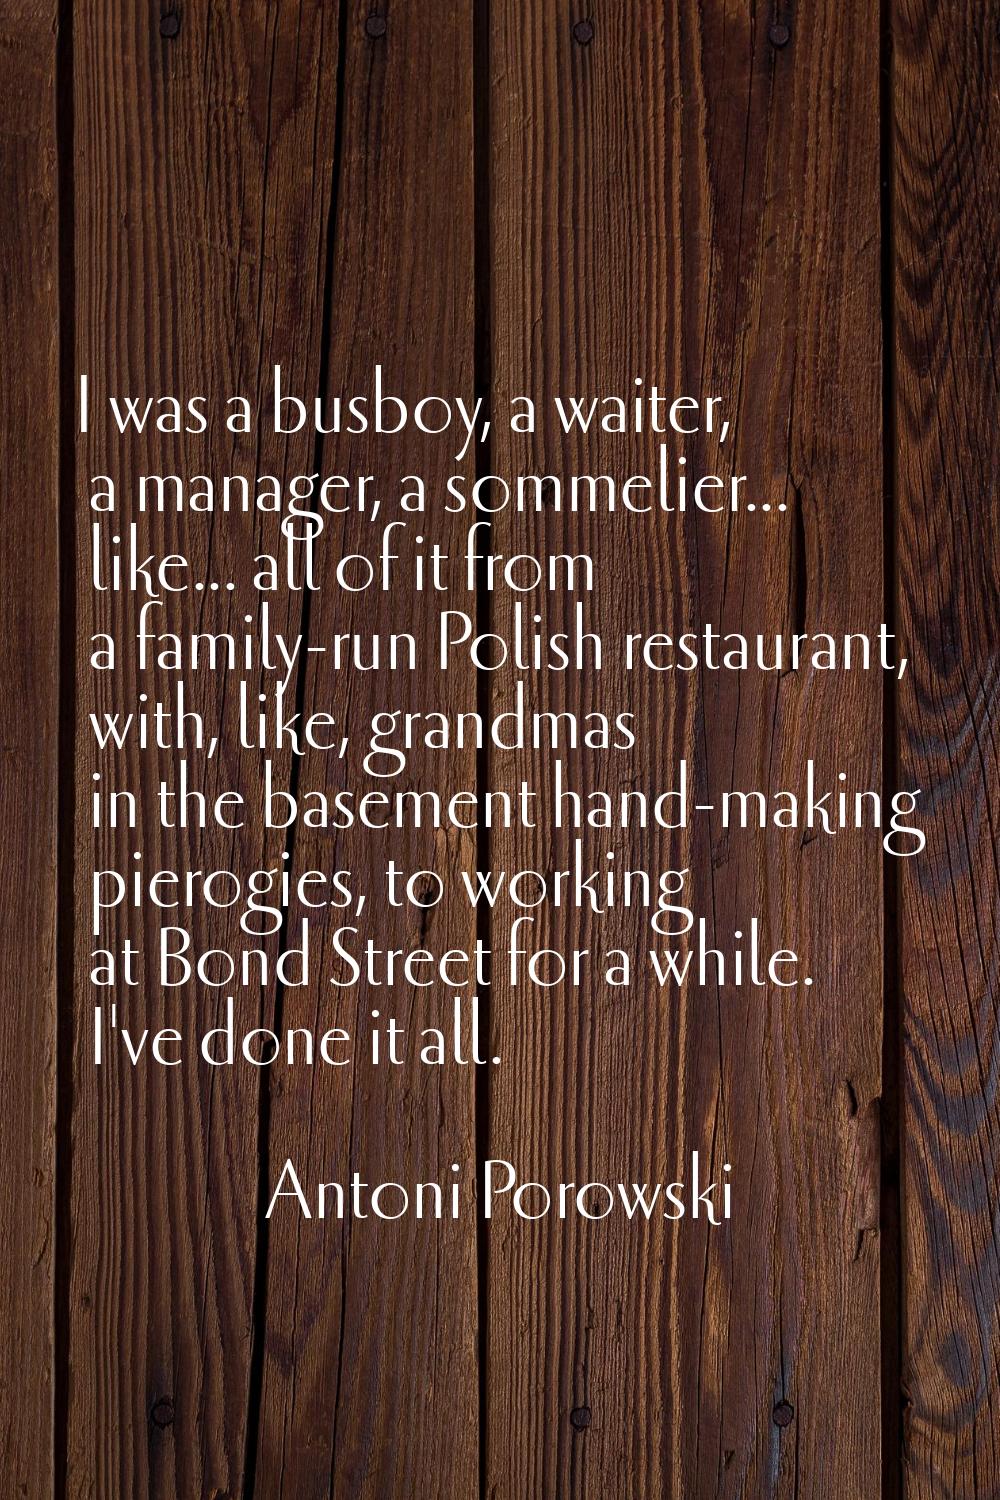 I was a busboy, a waiter, a manager, a sommelier... like... all of it from a family-run Polish rest